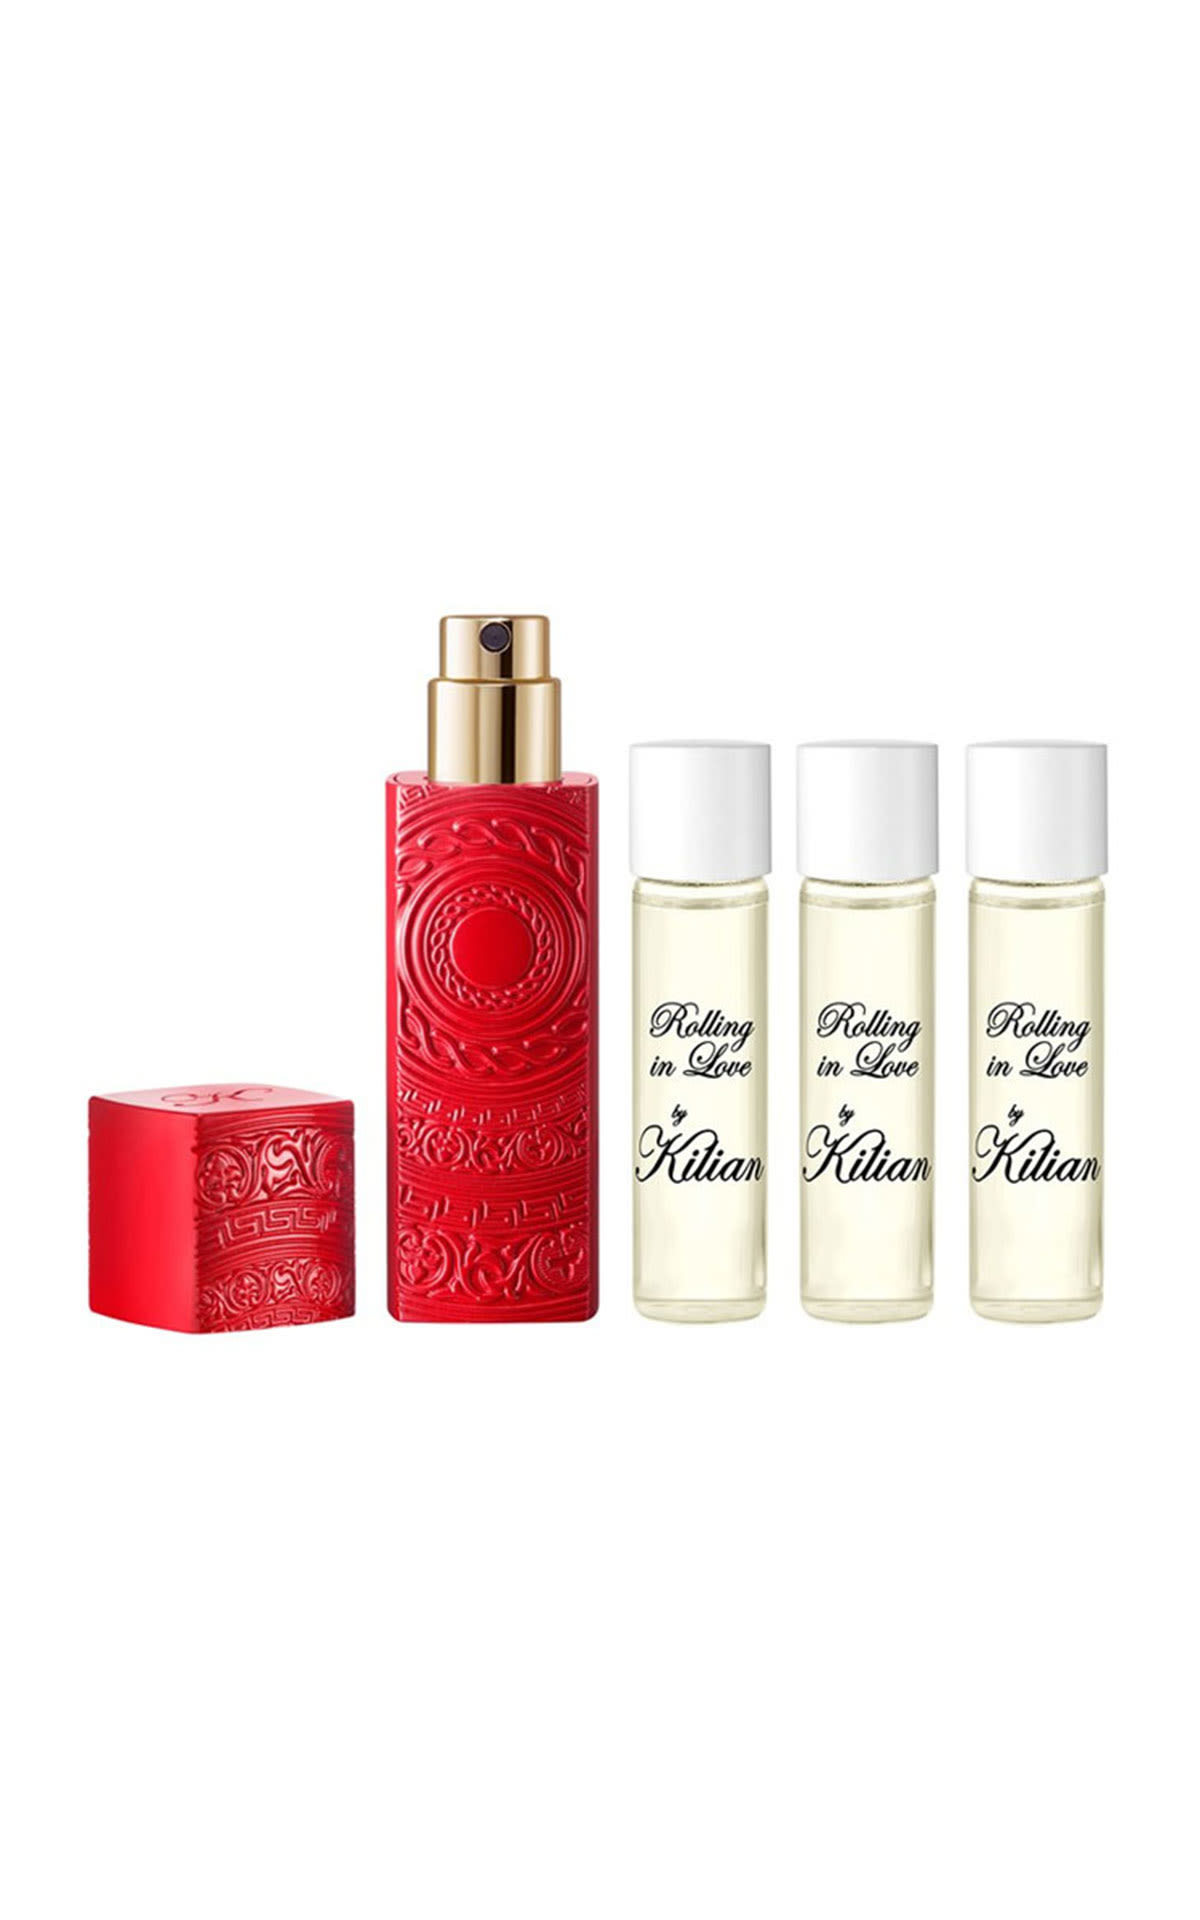 The Cosmetics Company Store Kilian Paris Rolling in love travel set from Bicester Village